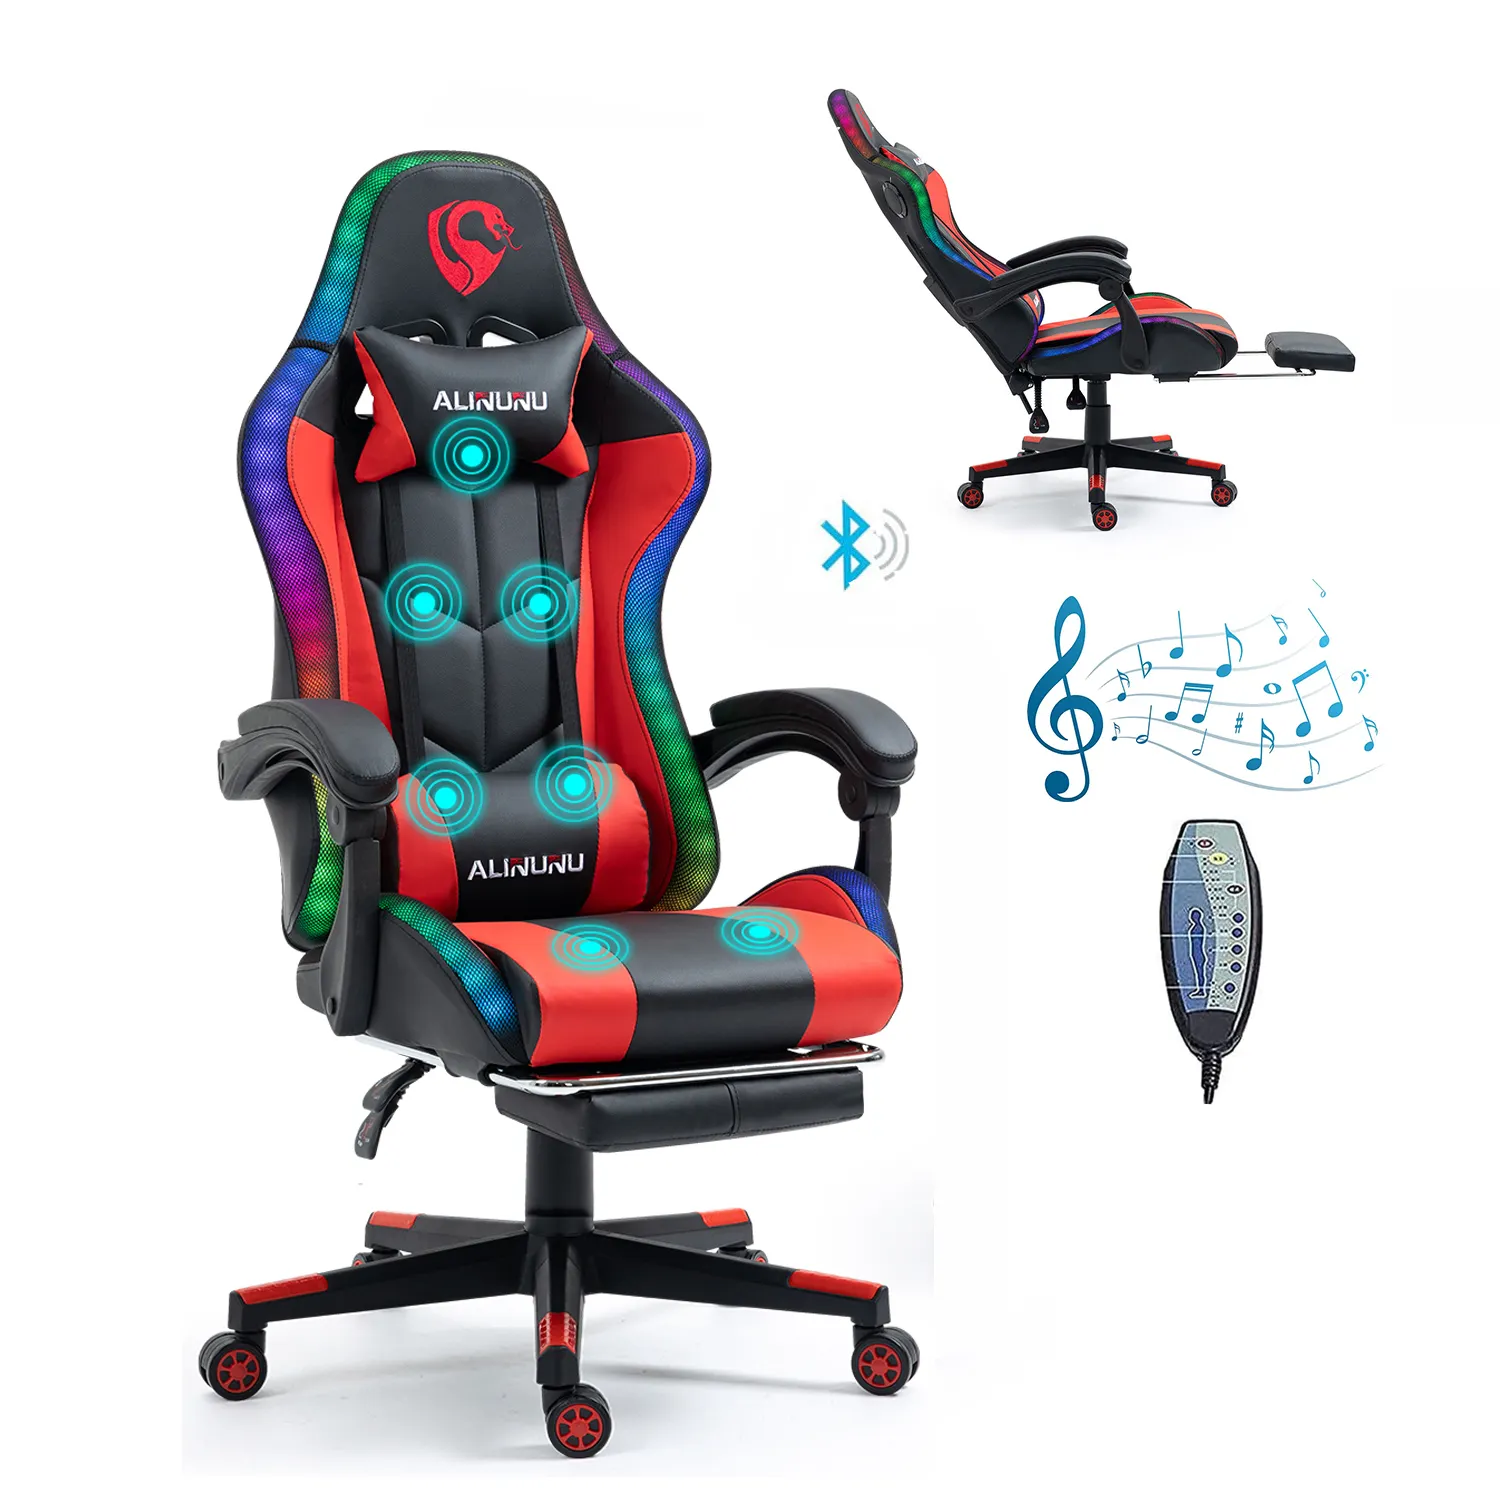 ALINUNU Factory Direct RGB Racing Computer Gaming Chair LED Game Chair with Speakers and Massage